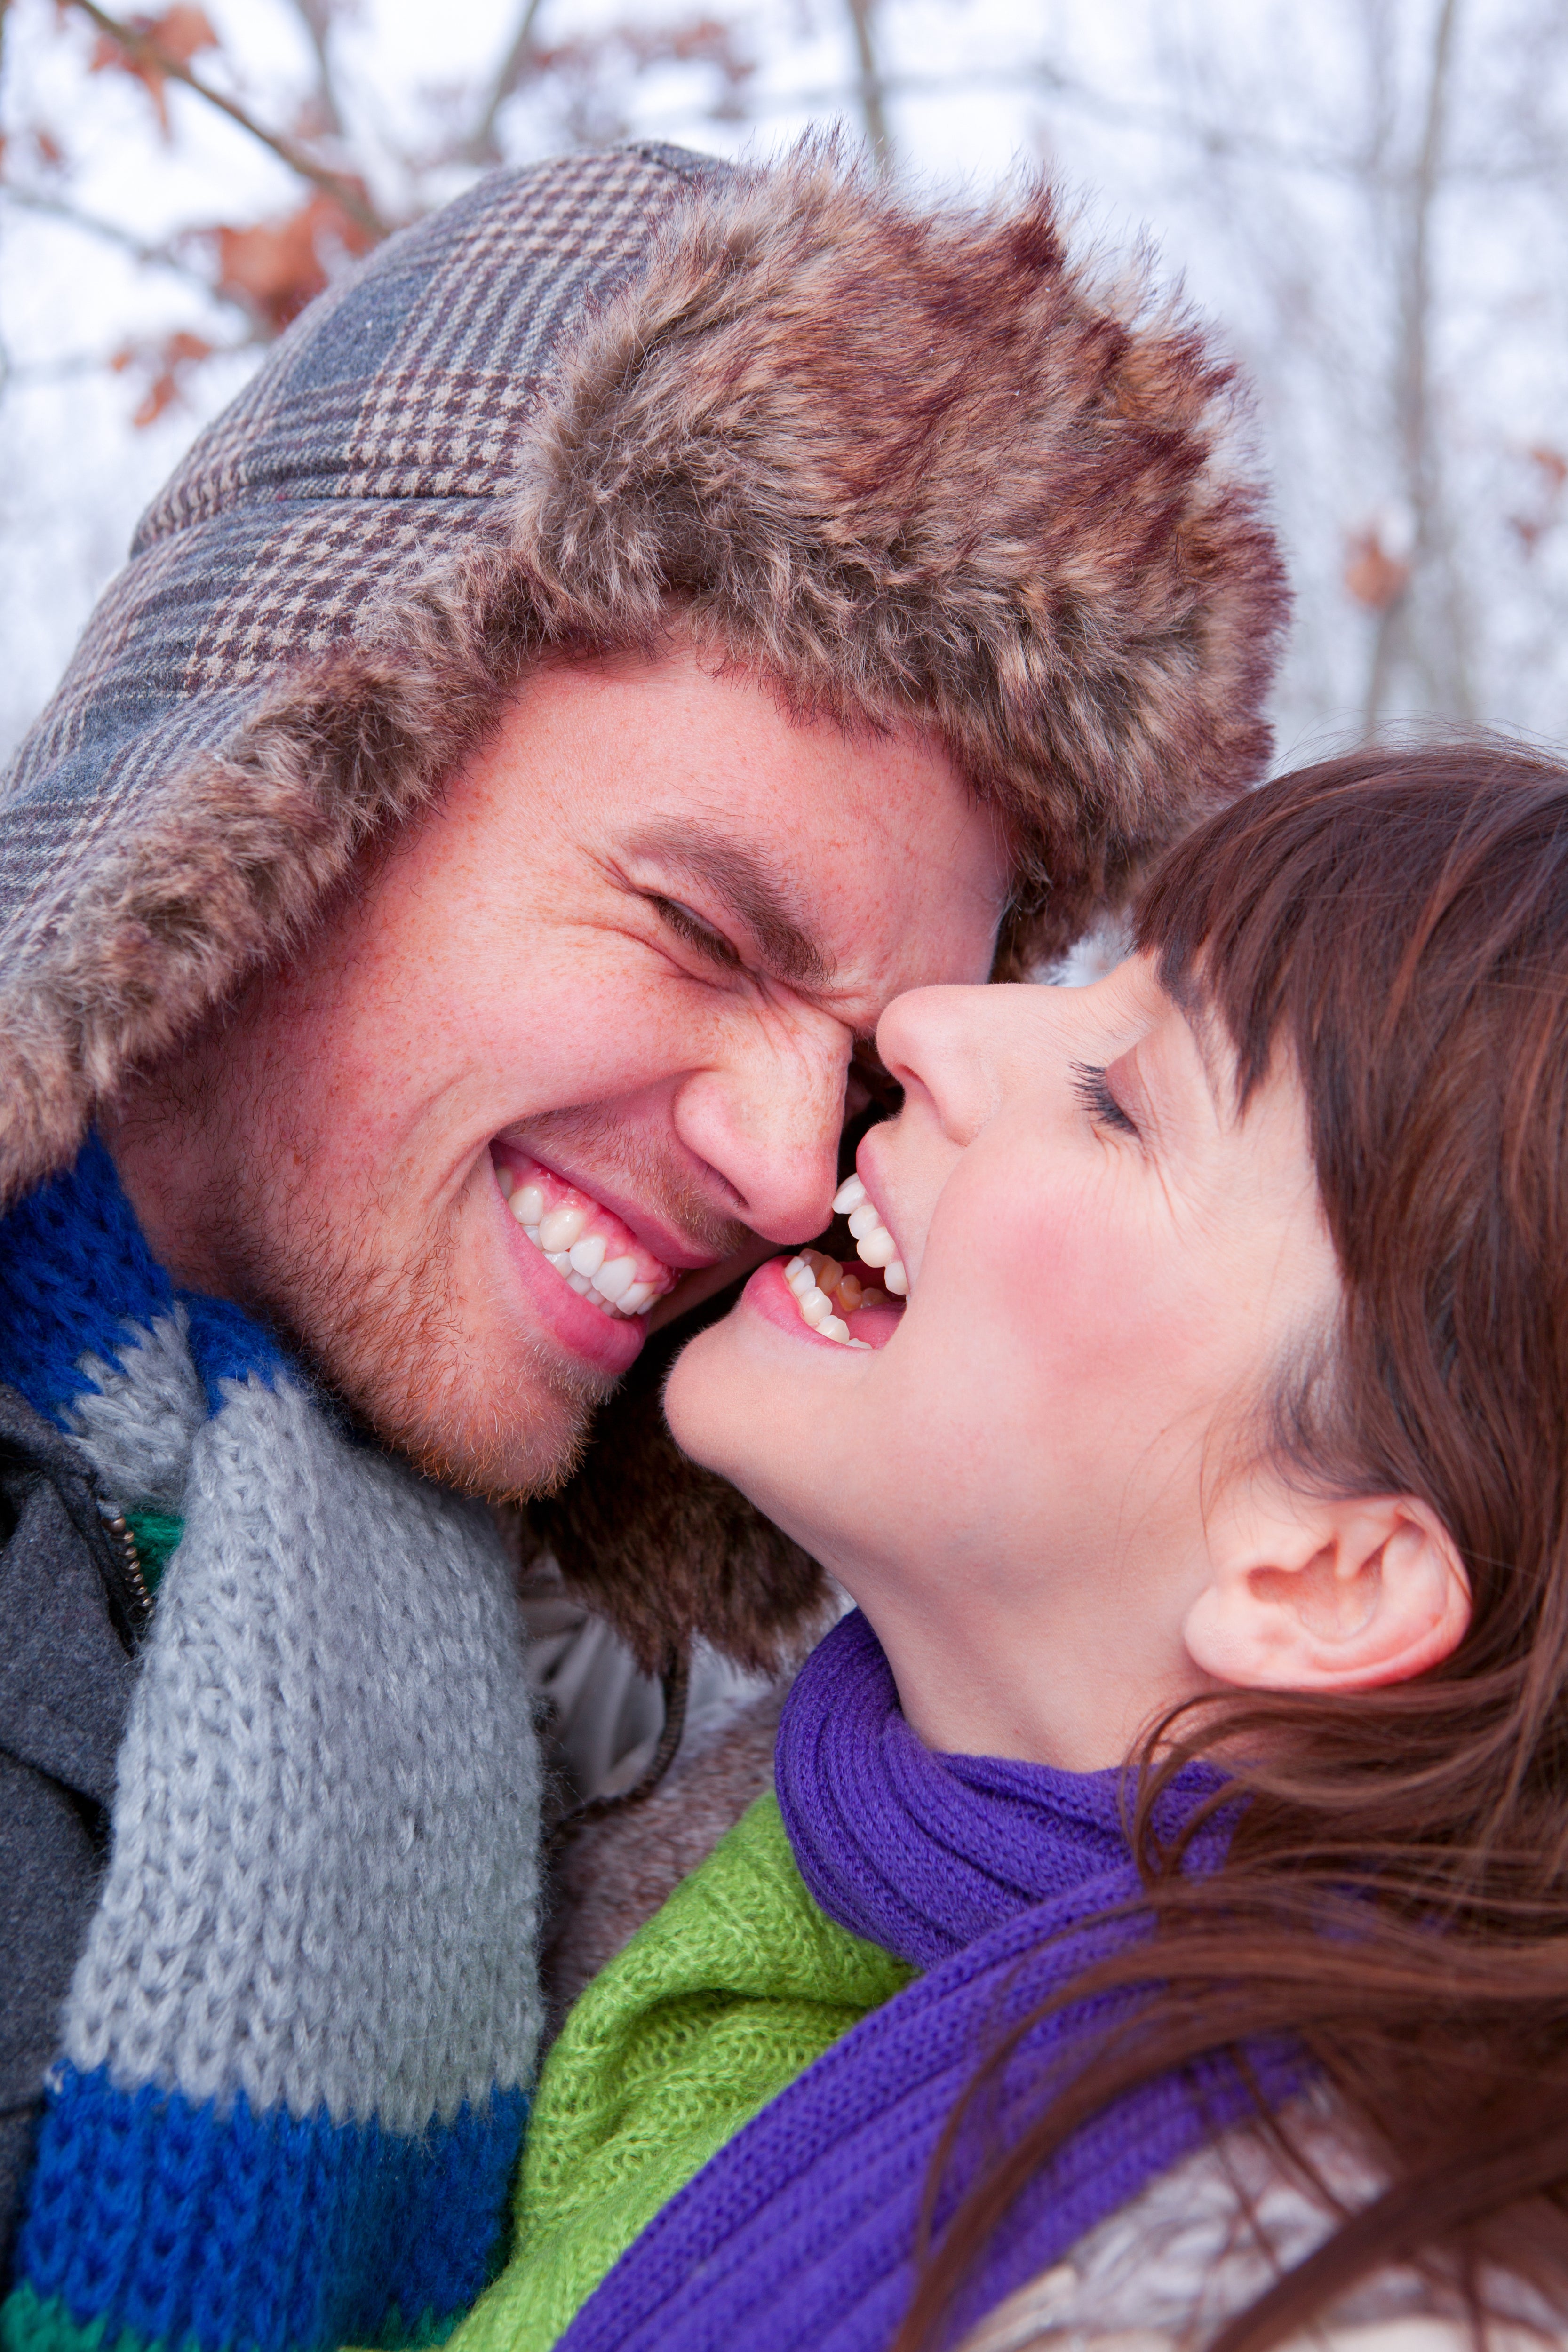 Outdoor winter candid photo of happy man and woman as she playfully bites his nose